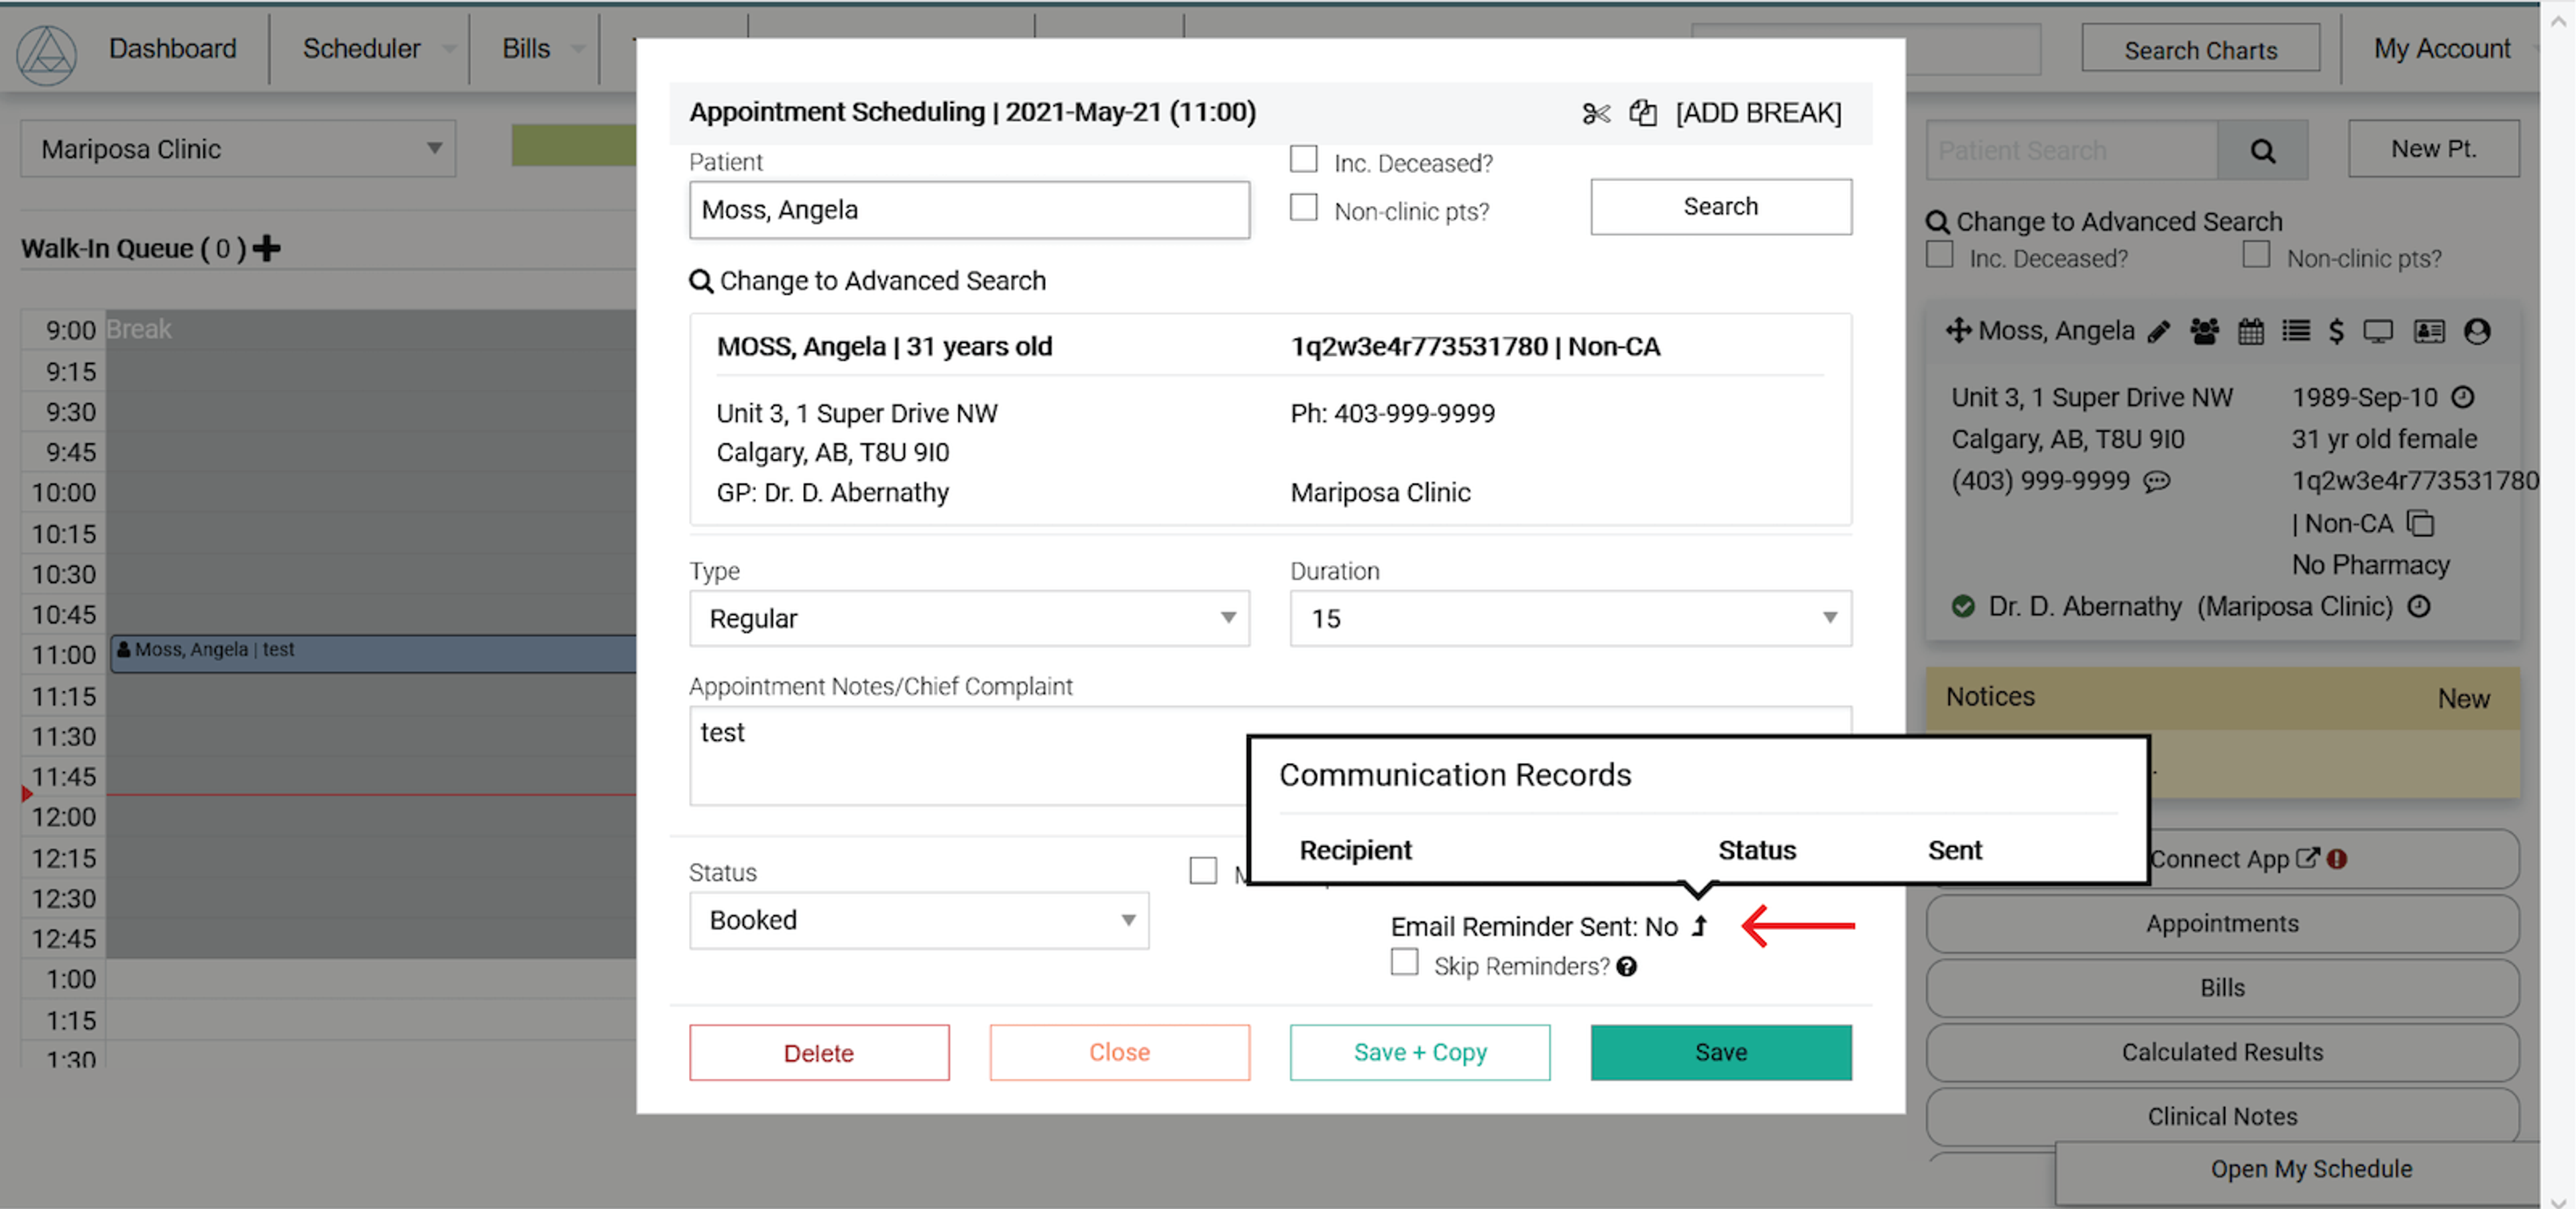 Appointment scheduling workspace with red arrow pointing at Email Reminder Sent counter